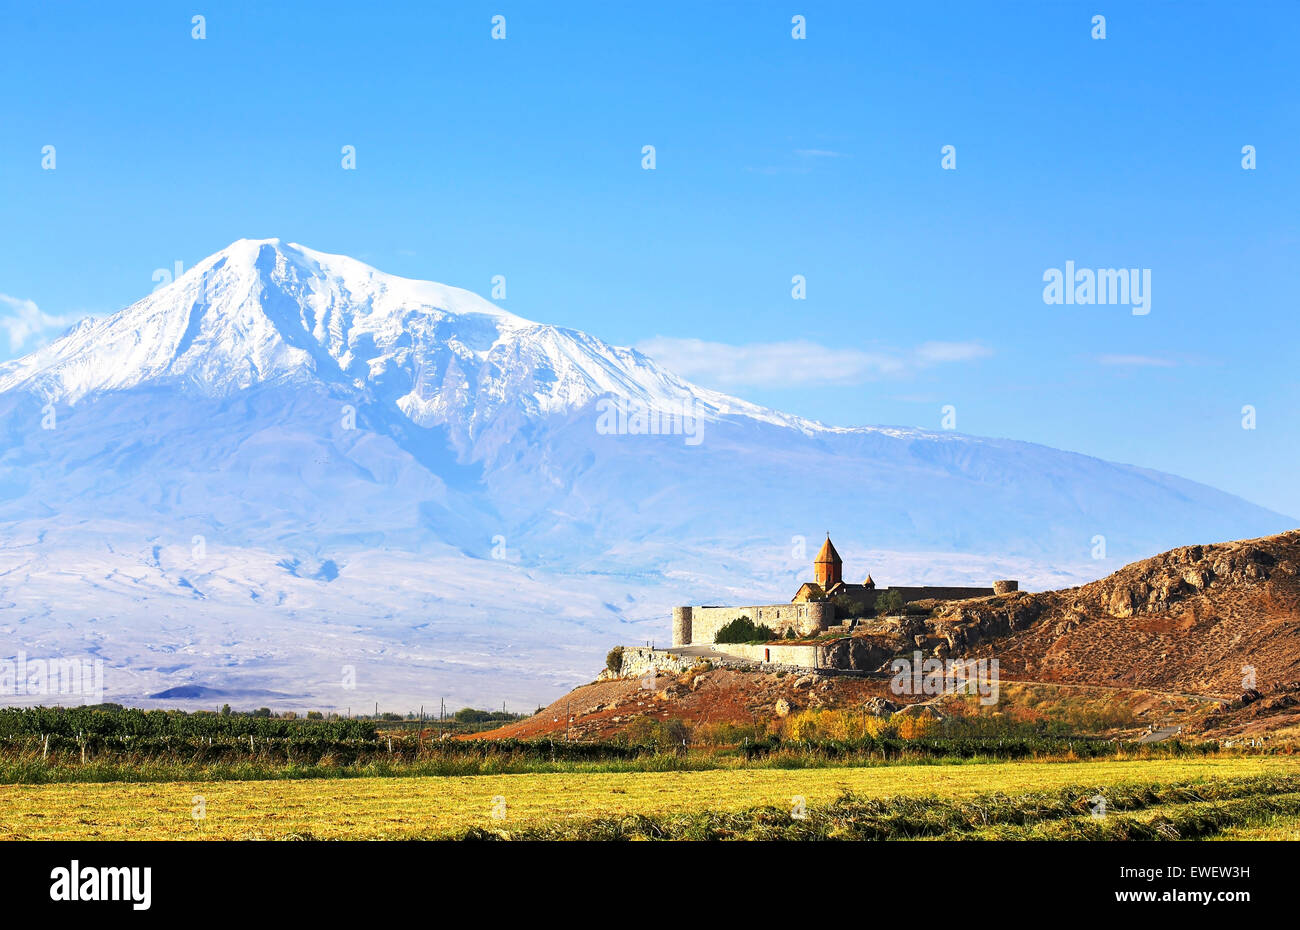 Ancient monastery on a background of mountains and grape fields Stock Photo